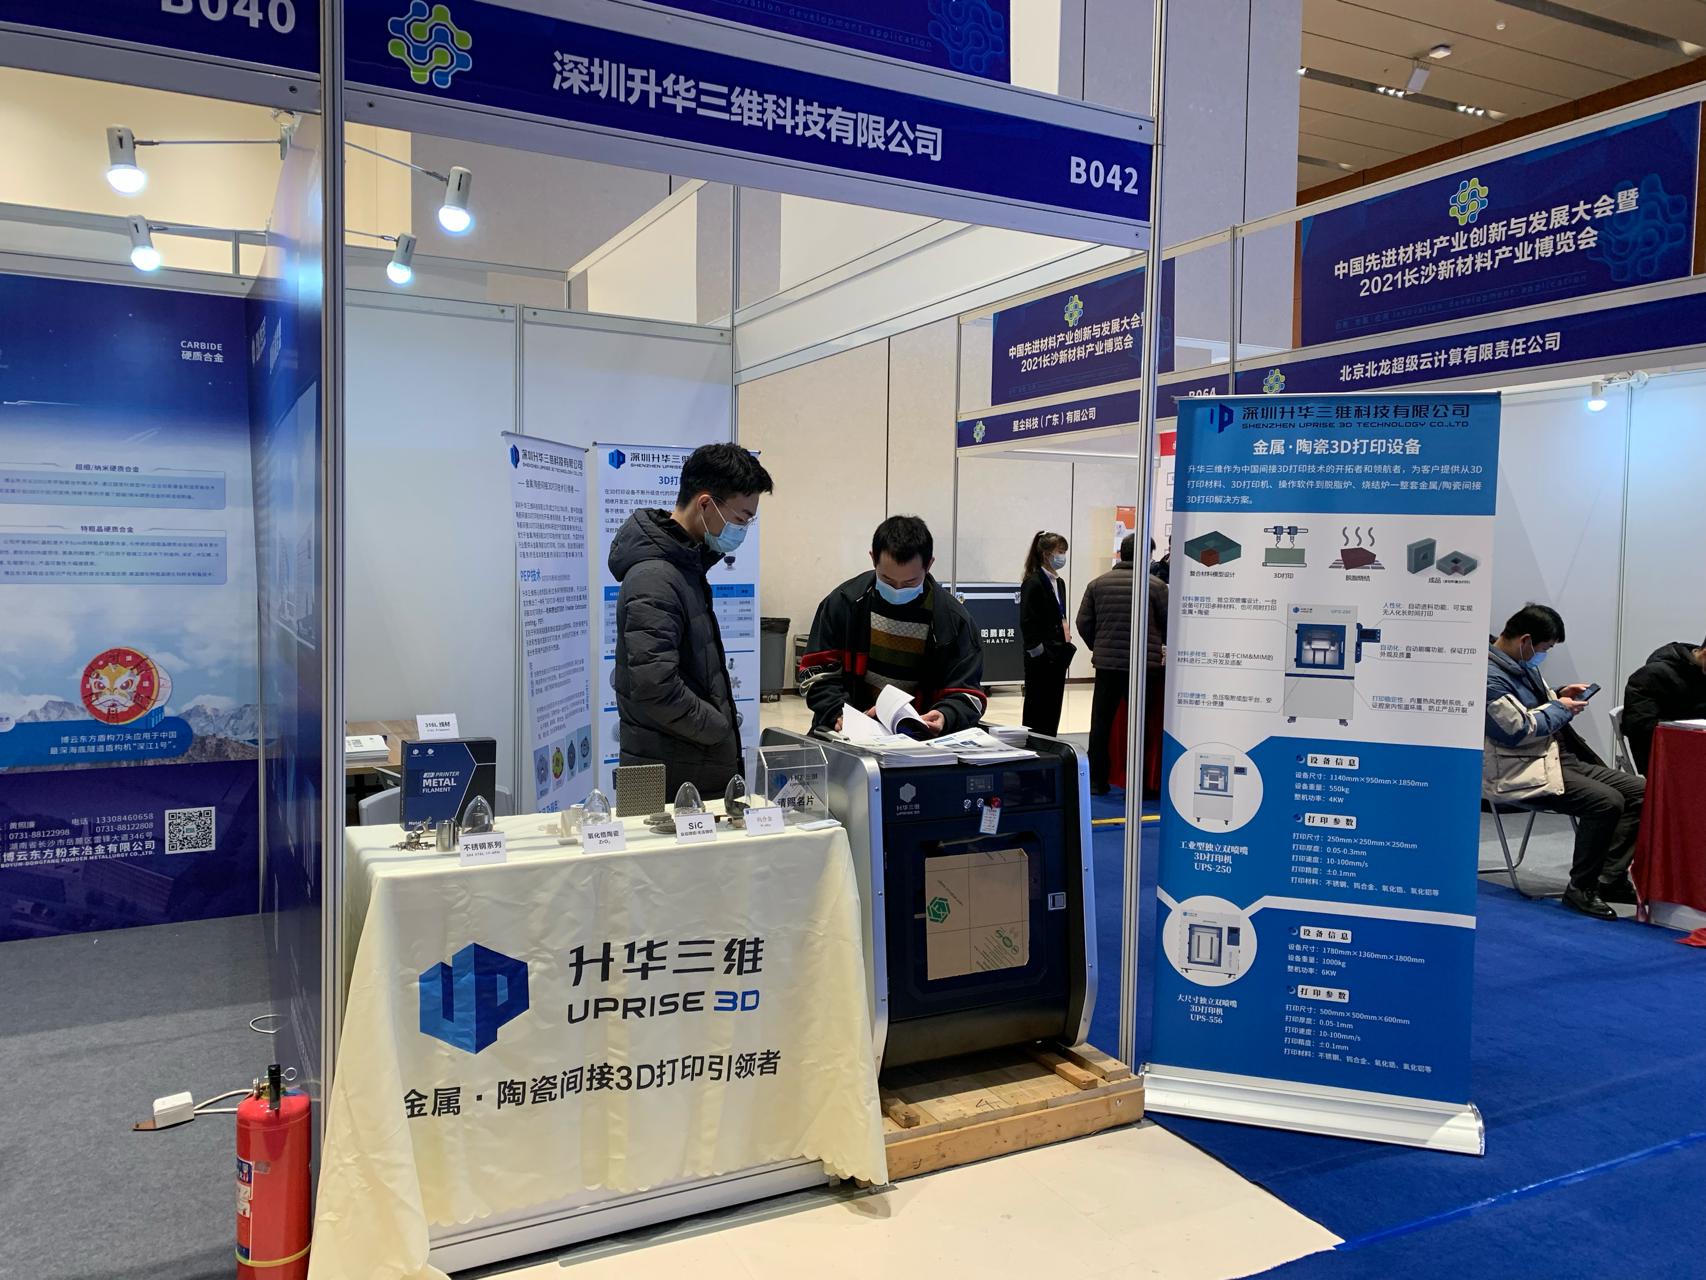 UPRISE 3D Participated in the 2021 National Powder Metallurgy Conference